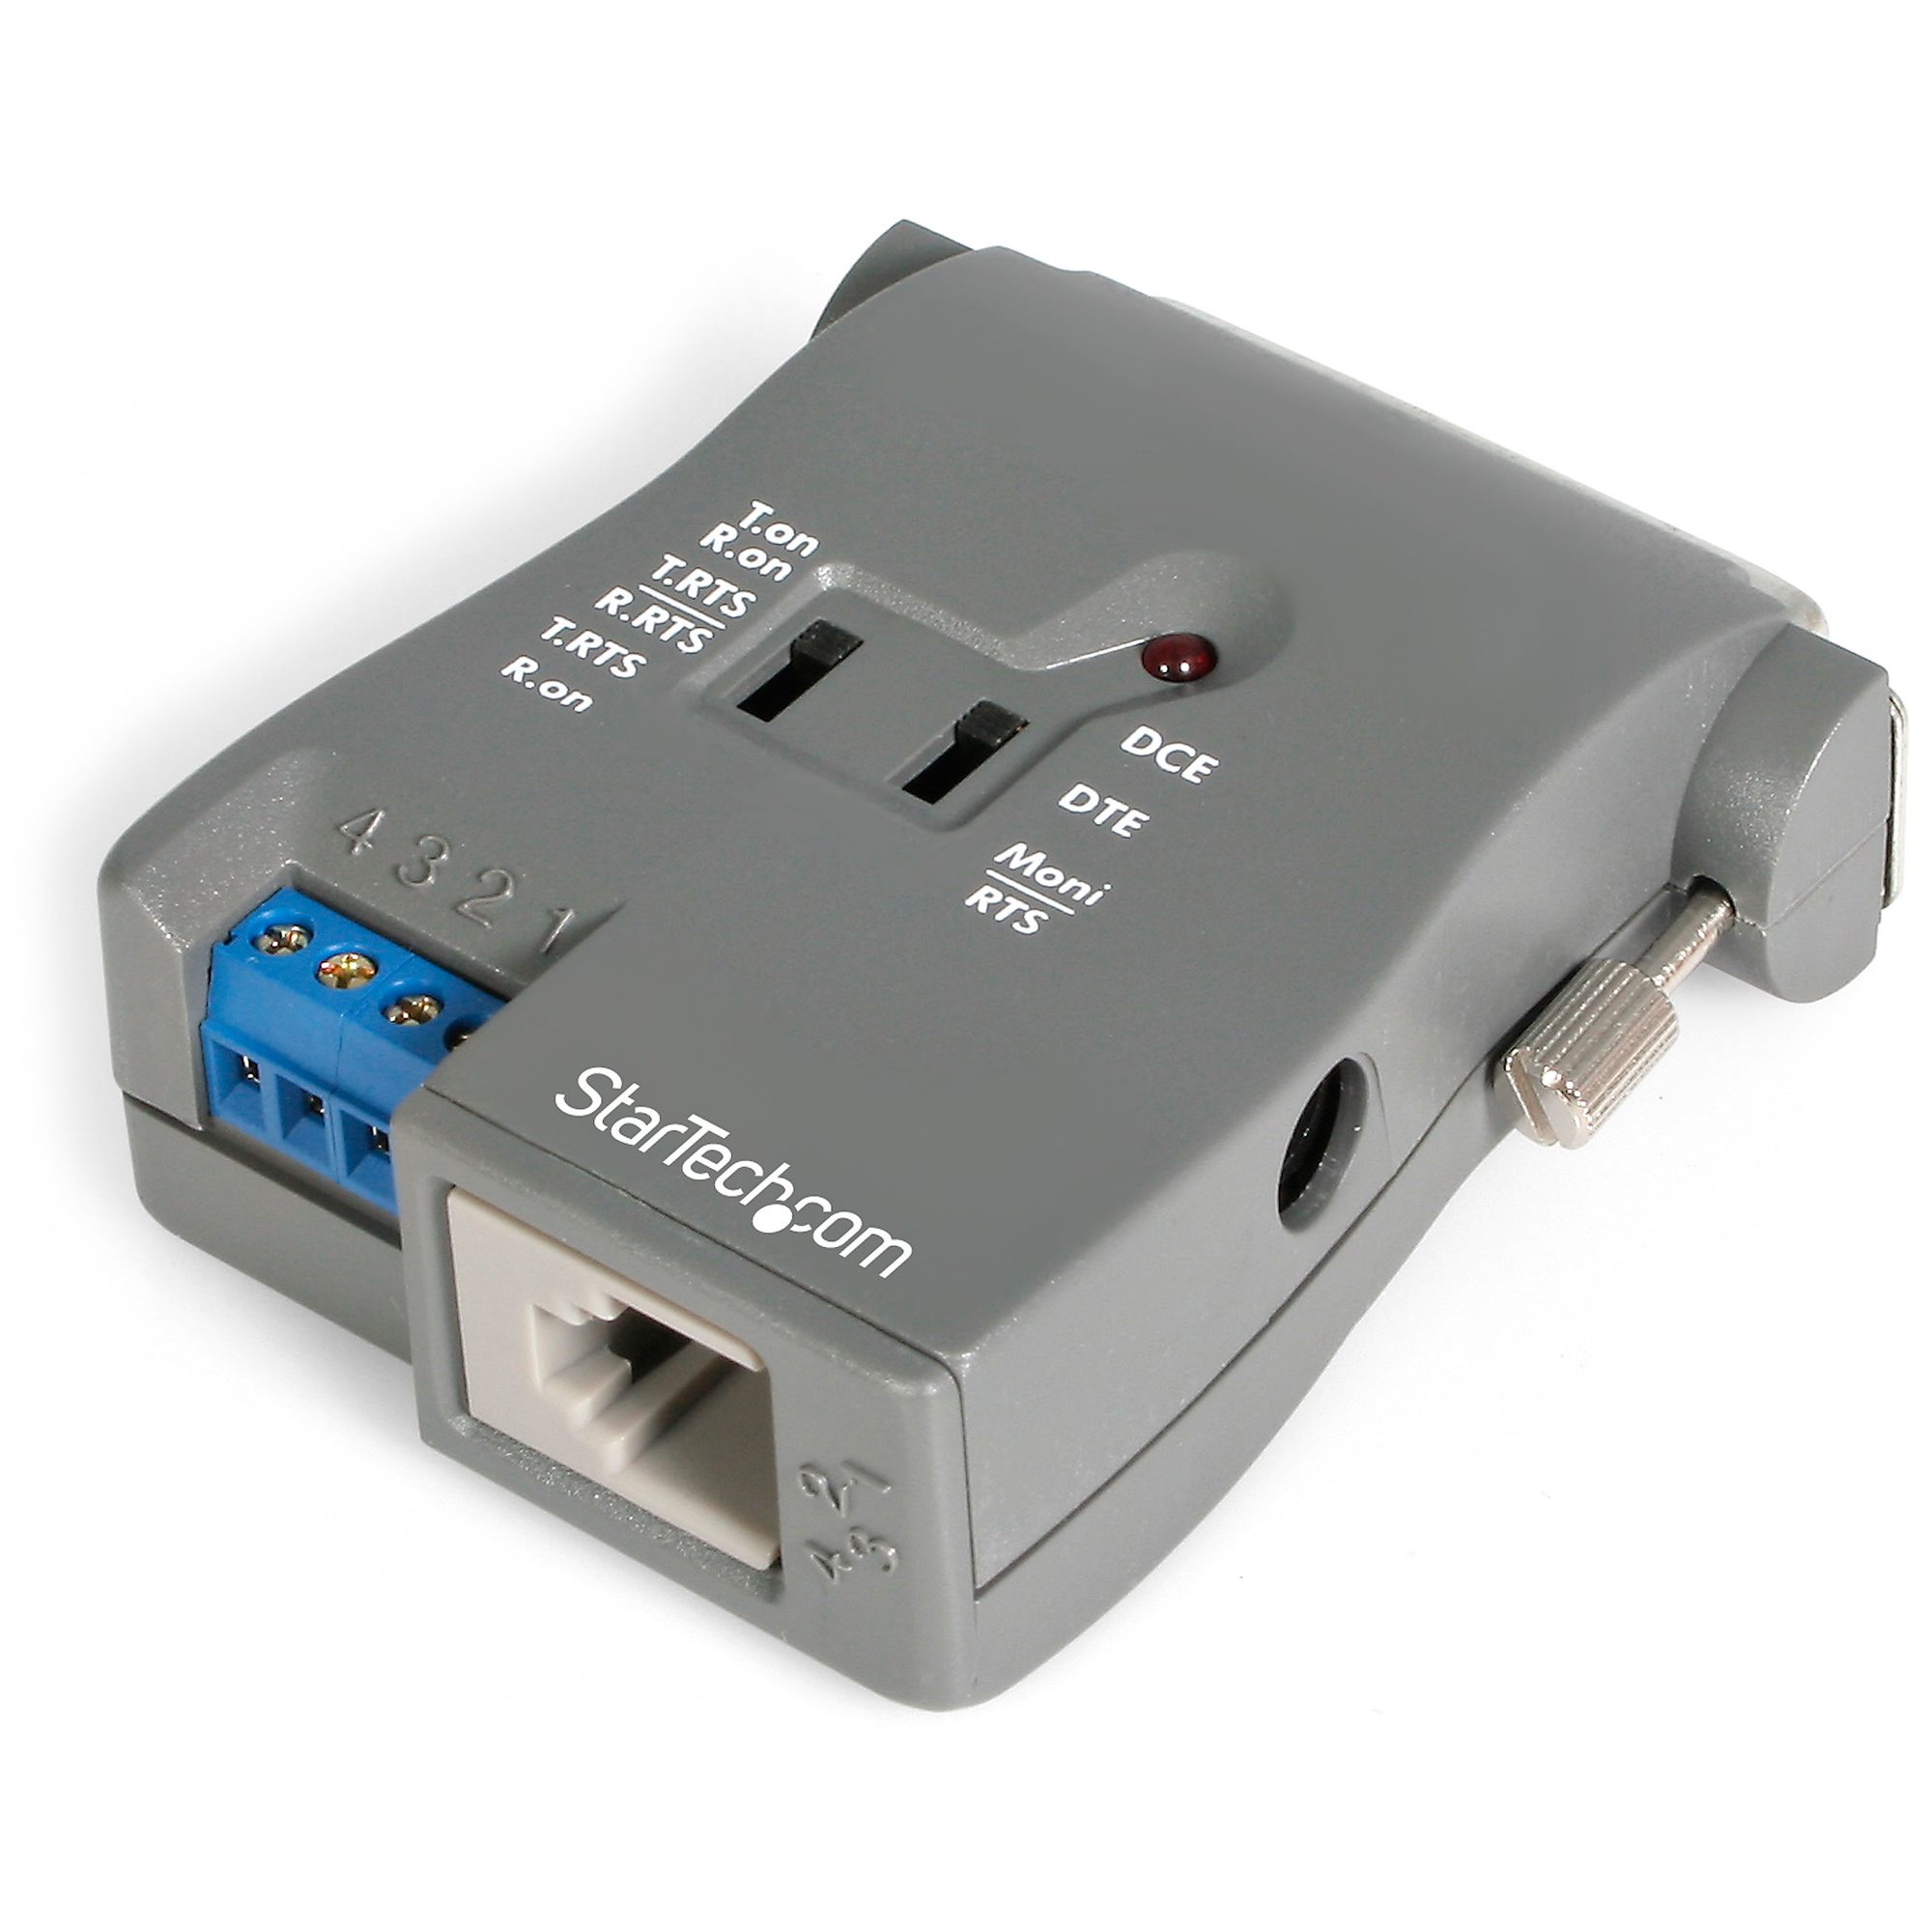 RS-232 to RS485/422 Serial Converter